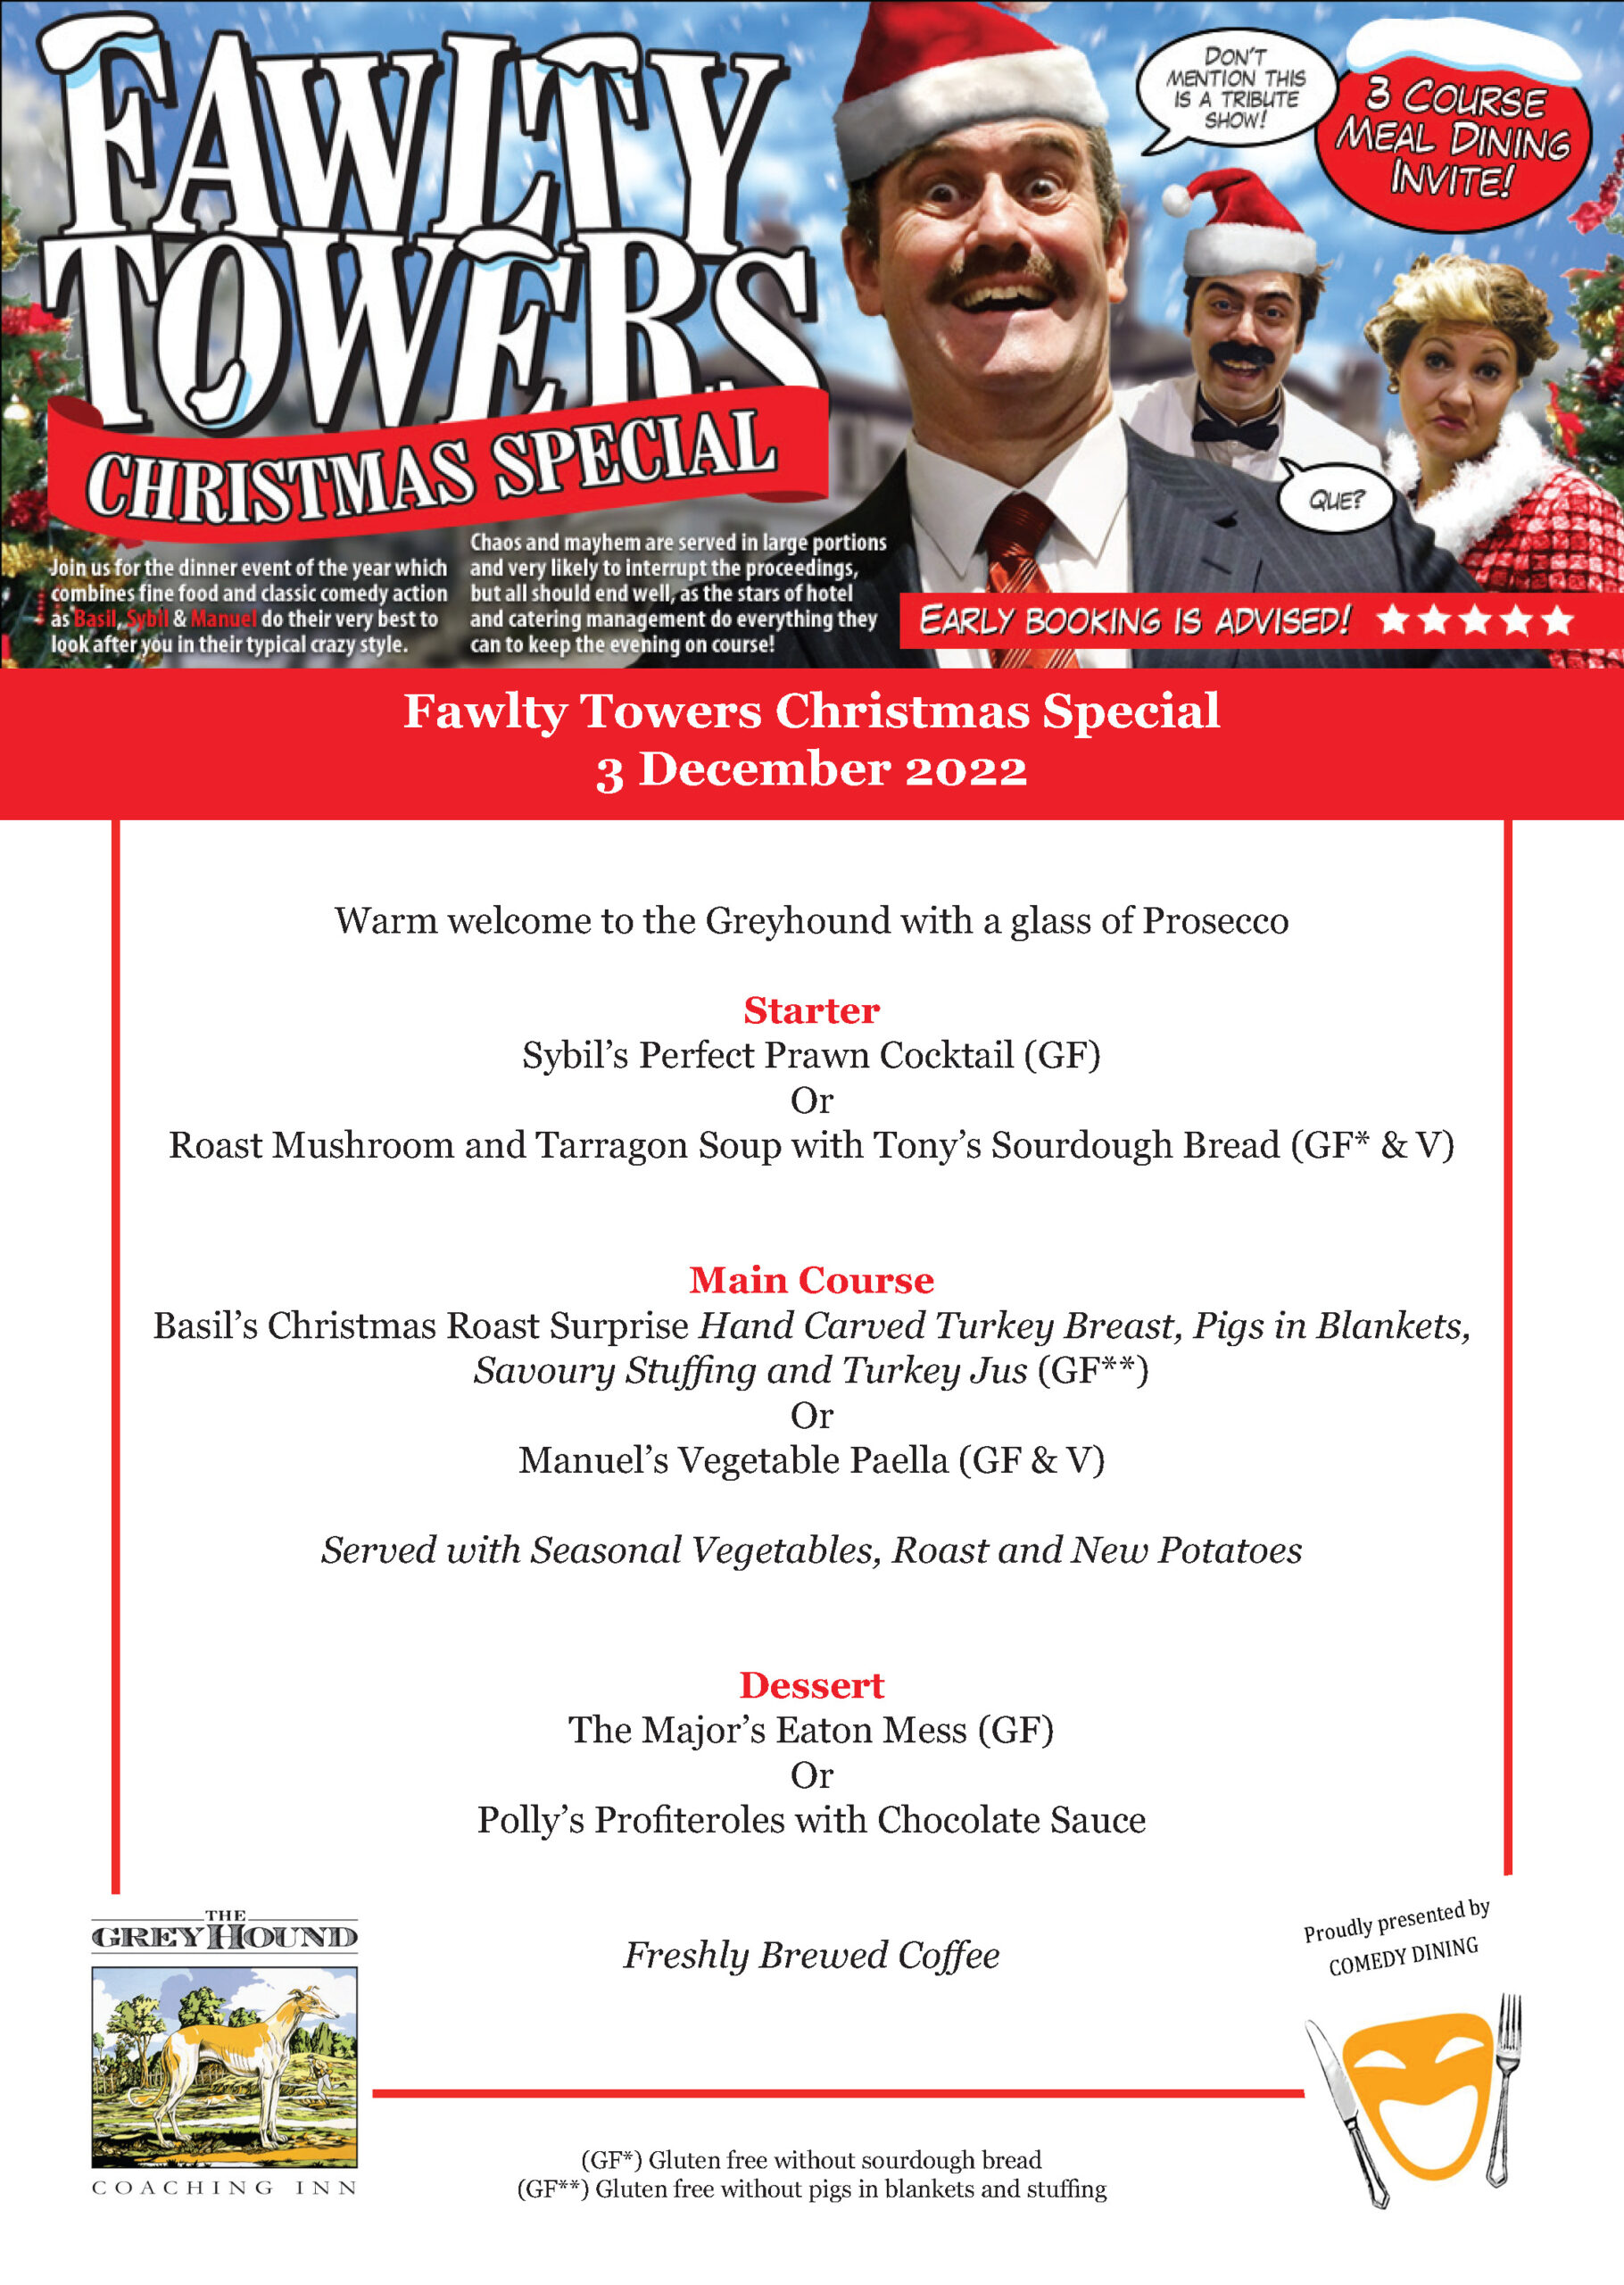 //www.greyhoundinn.co.uk/wp-content/uploads/2022/06/Fawlty-Towers-Xmas-Special-3-Dec-MENU-scaled.jpg